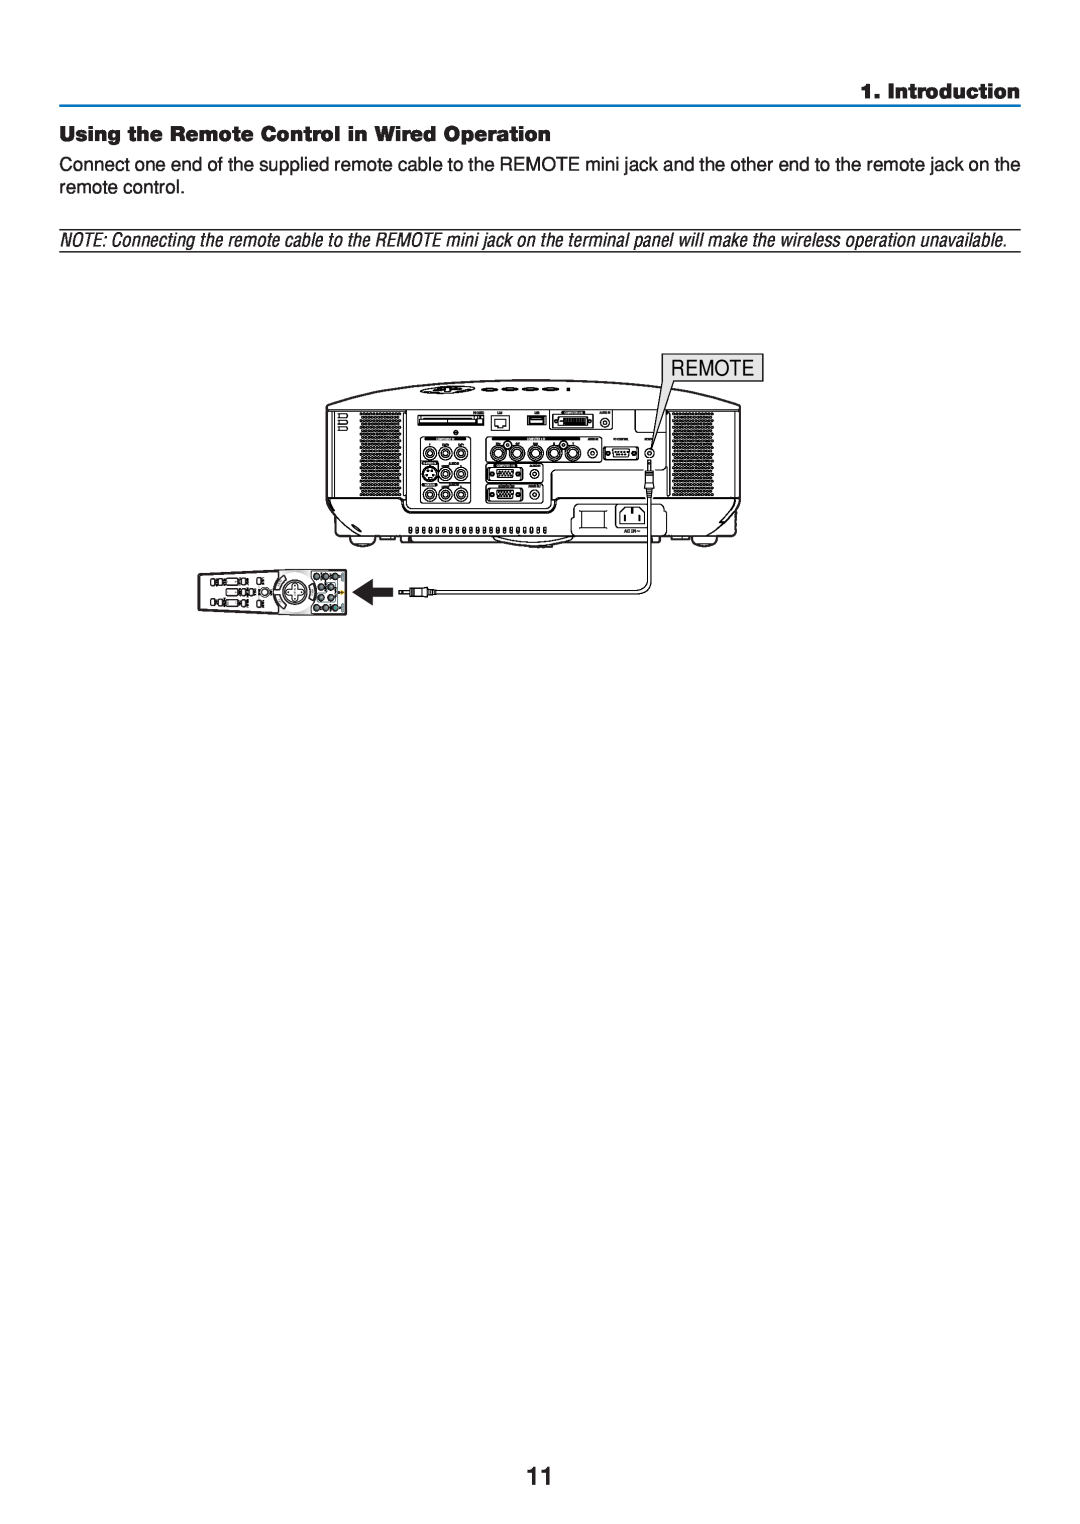 Dukane 8808 user manual Introduction Using the Remote Control in Wired Operation 